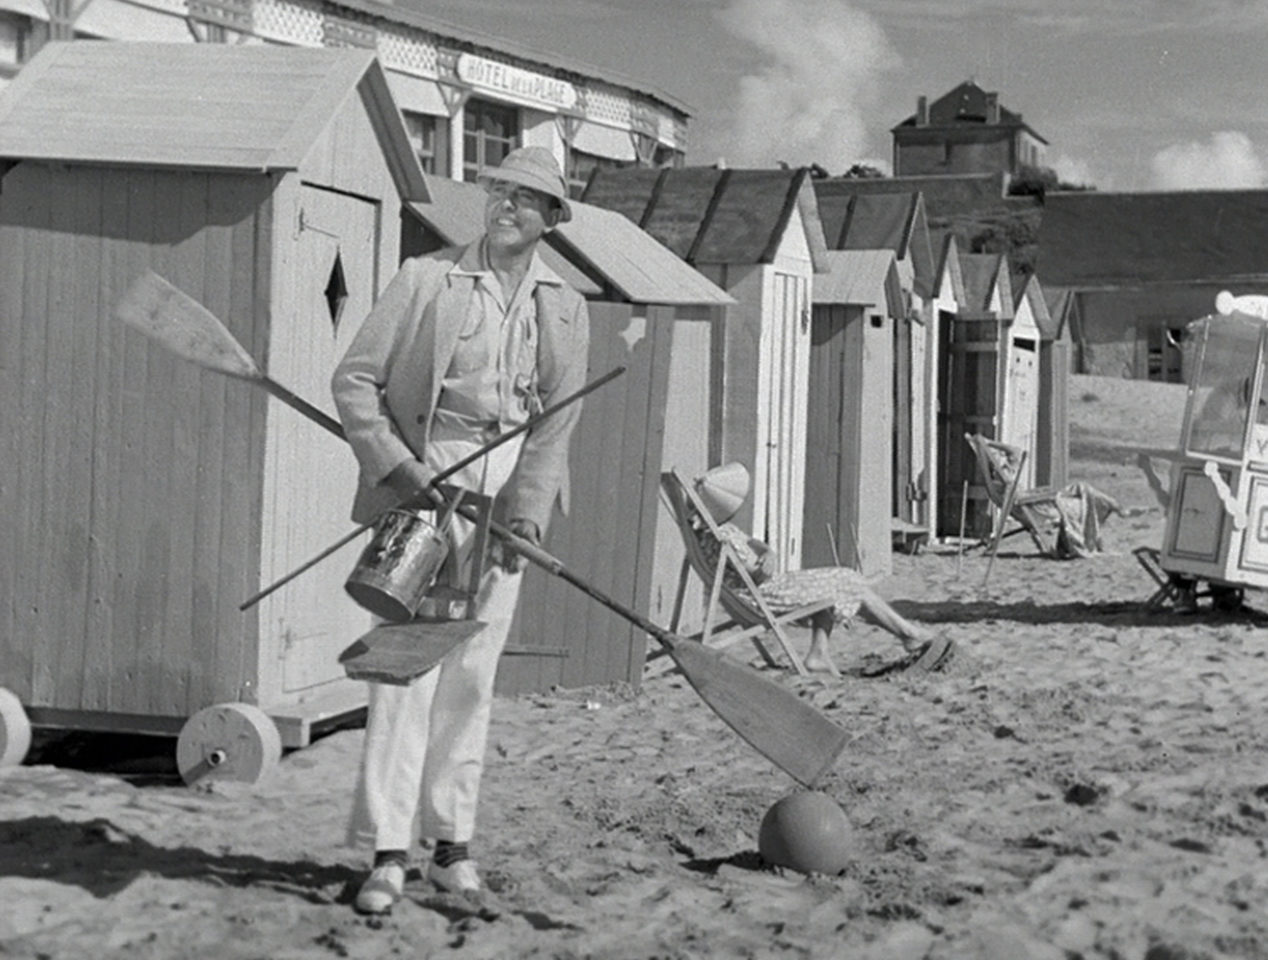 A man is standing on a beach holding two wooden oars.